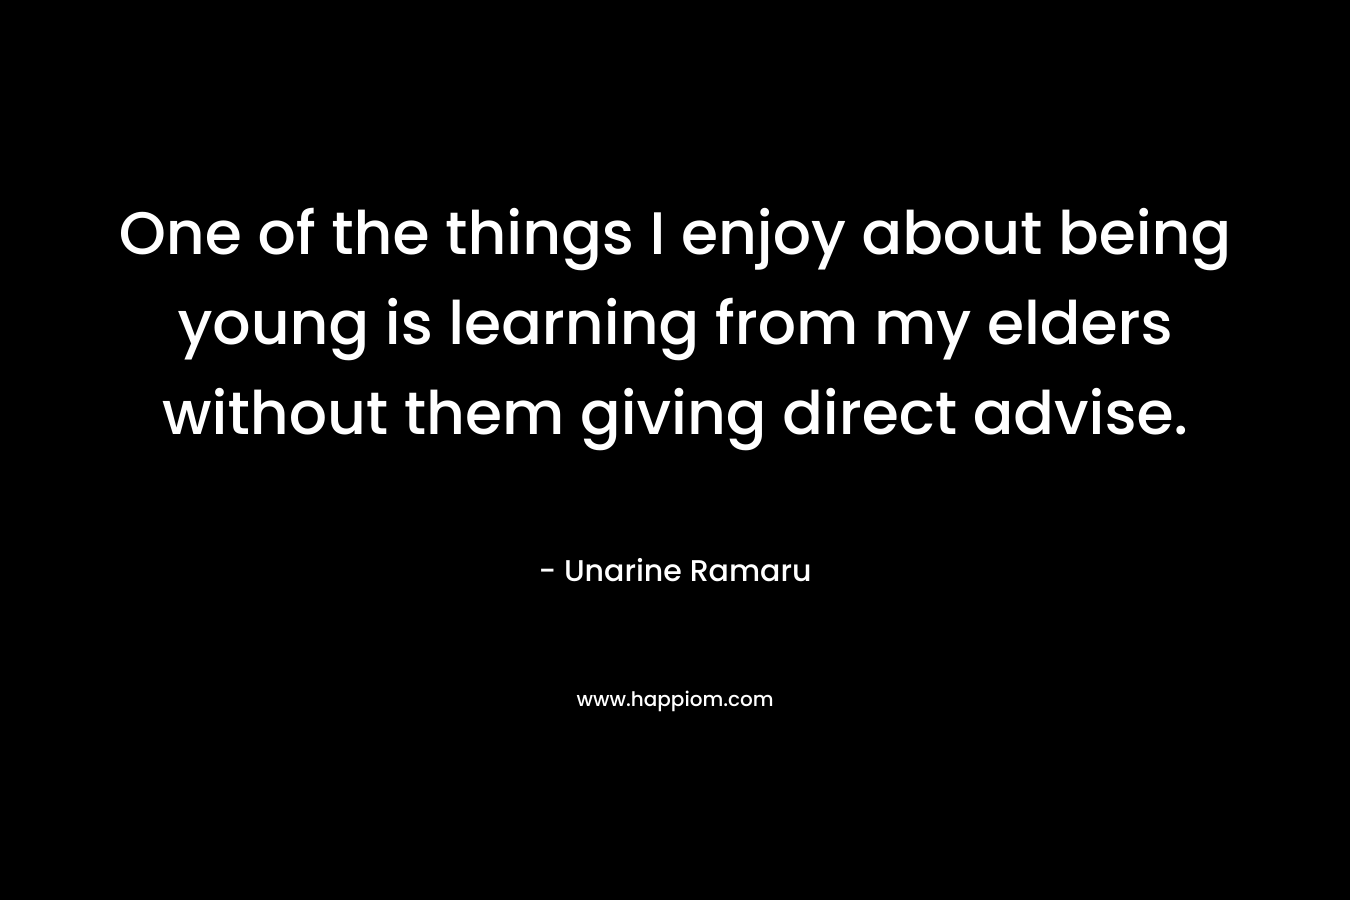 One of the things I enjoy about being young is learning from my elders without them giving direct advise. – Unarine Ramaru